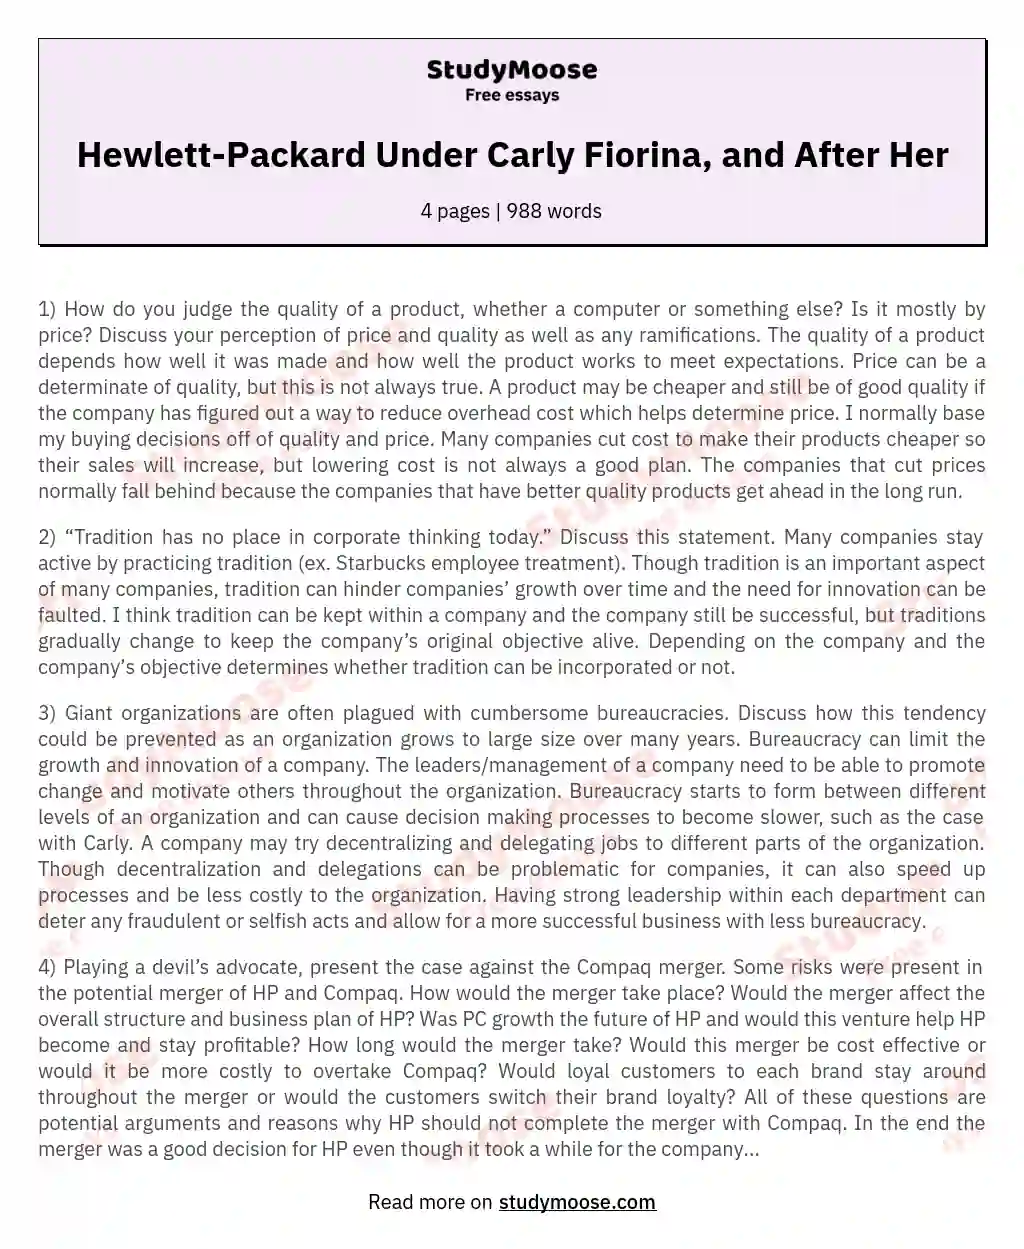 Hewlett-Packard Under Carly Fiorina, and After Her essay